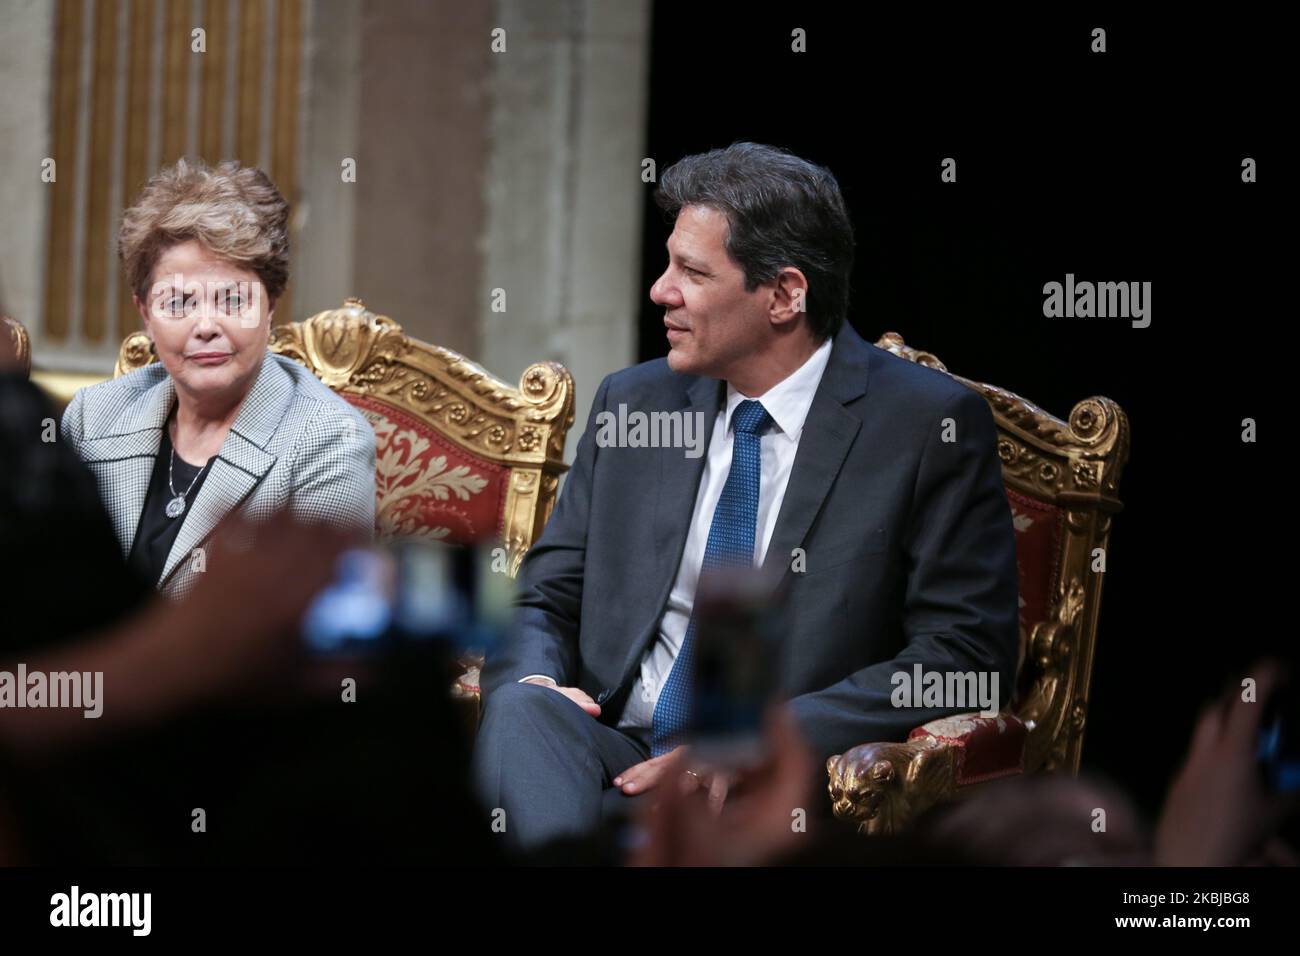 (Lto R) Former Brazilian president Dilma Rousseff and former Sao Paolo Mayor Fernando Hadda take part in a ceremony at the City Hall of Paris, on March 2, 2020, during wich the President Lula da Silva was named honorary citizen of the city of Paris. (Photo by Michel Stoupak/NurPhoto) Stock Photo